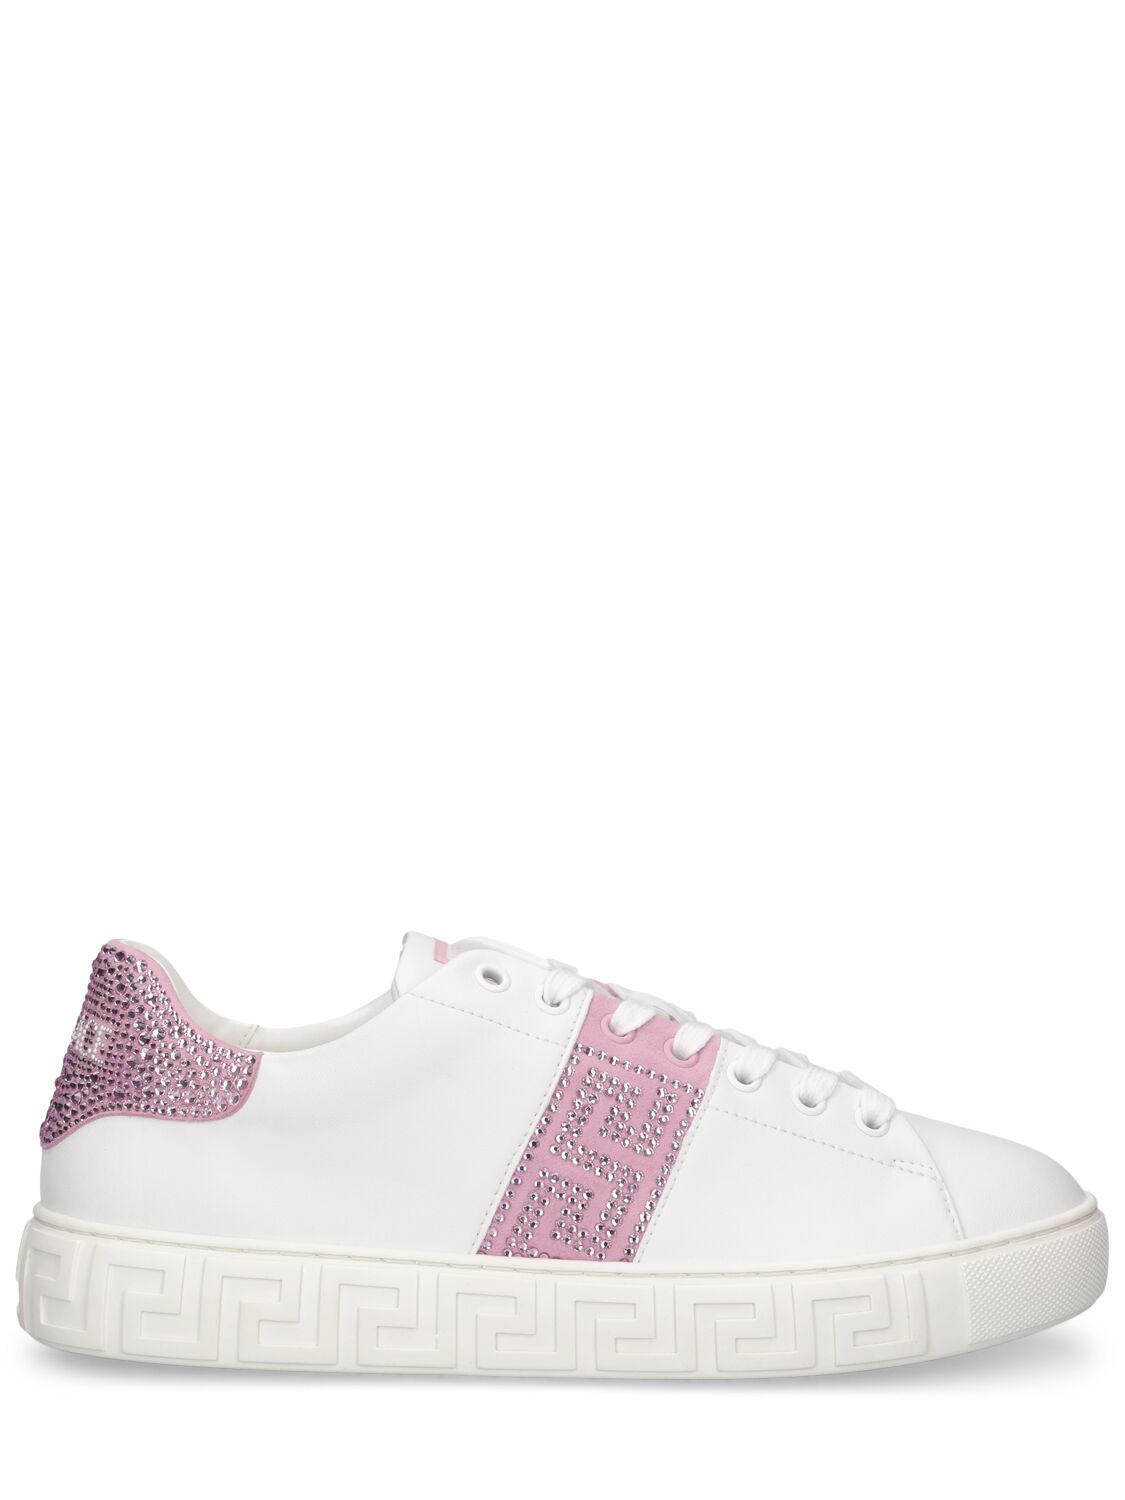 Versace Faux Leather & Crystals Low Top Sneakers In White,pink